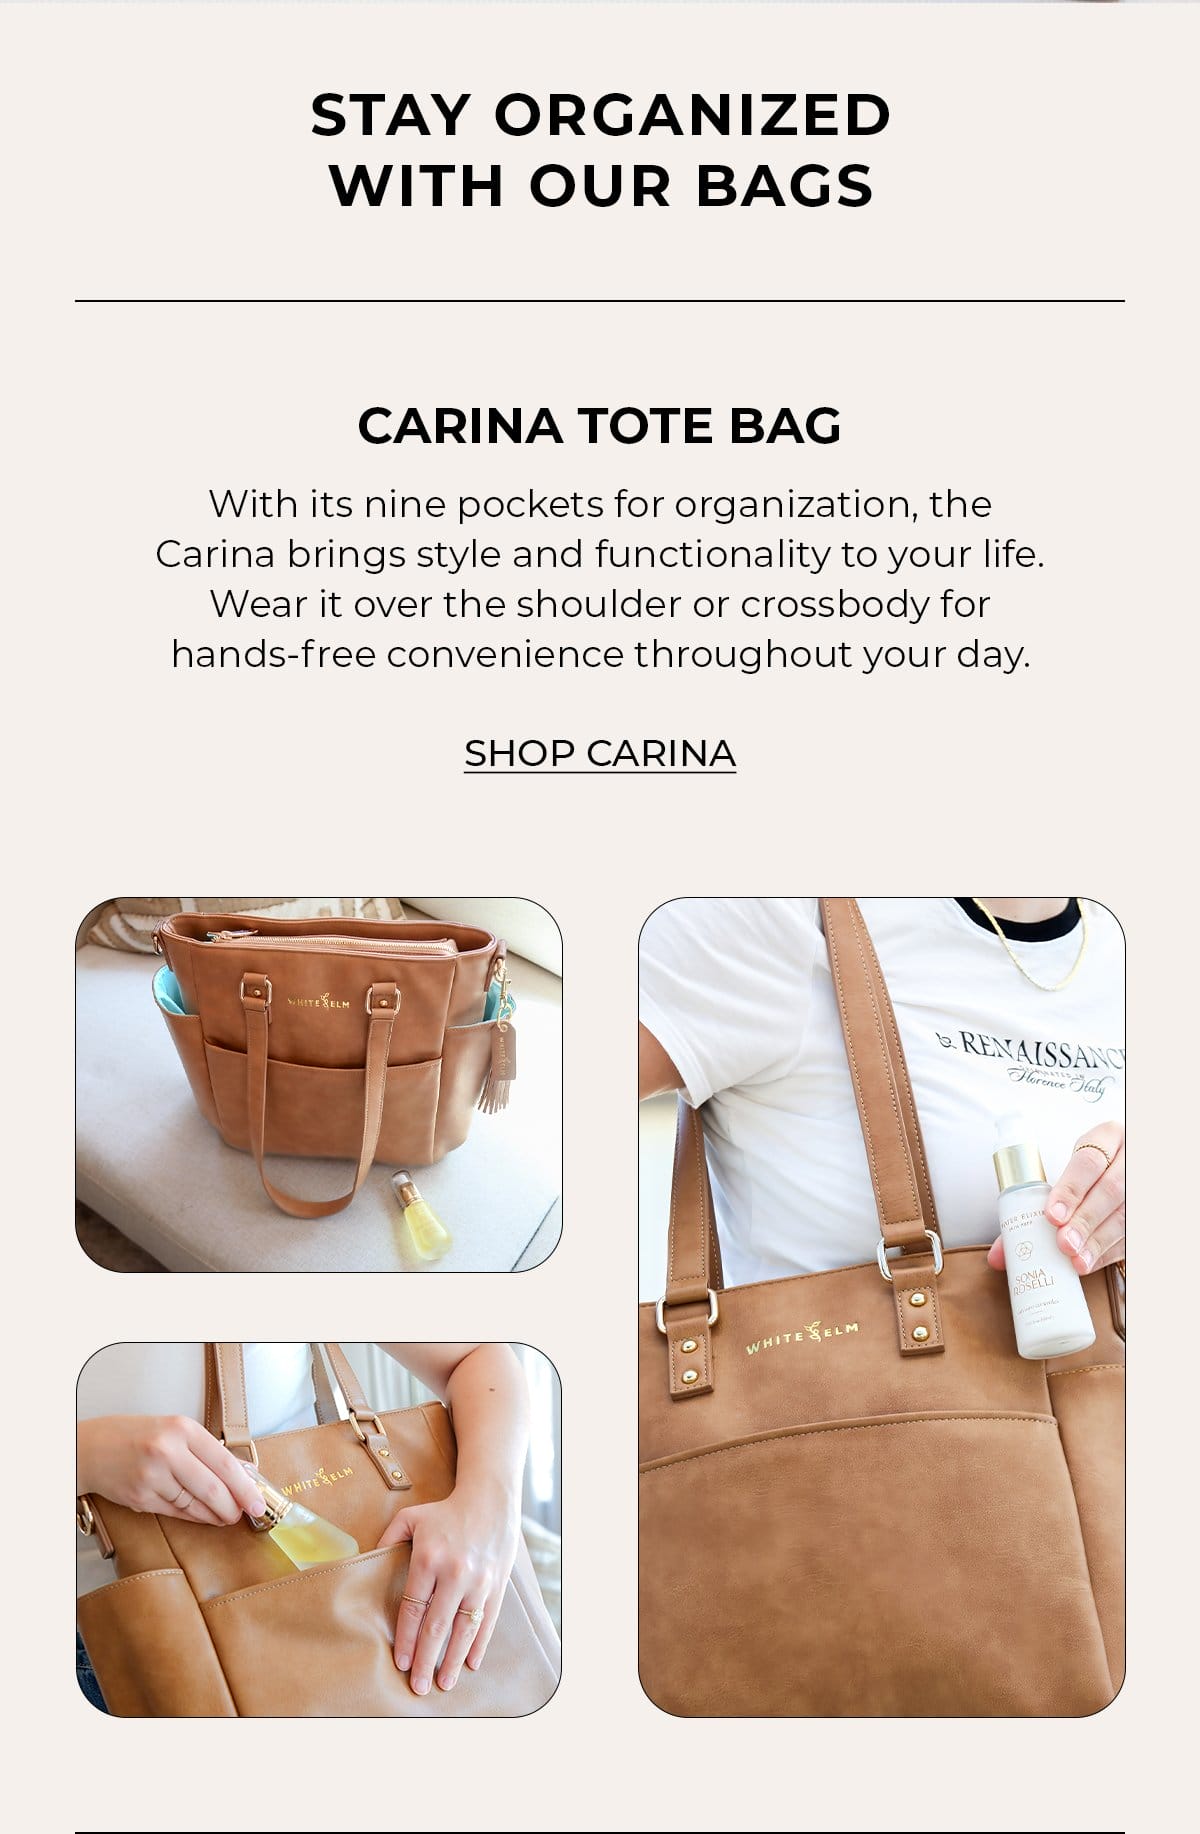 Carina Tote Bag- With its nine pockets for organization, the Carina brings style and functionality to your life. Wear it over the shoulder or crossbody for hands-free convenience throughout your day.